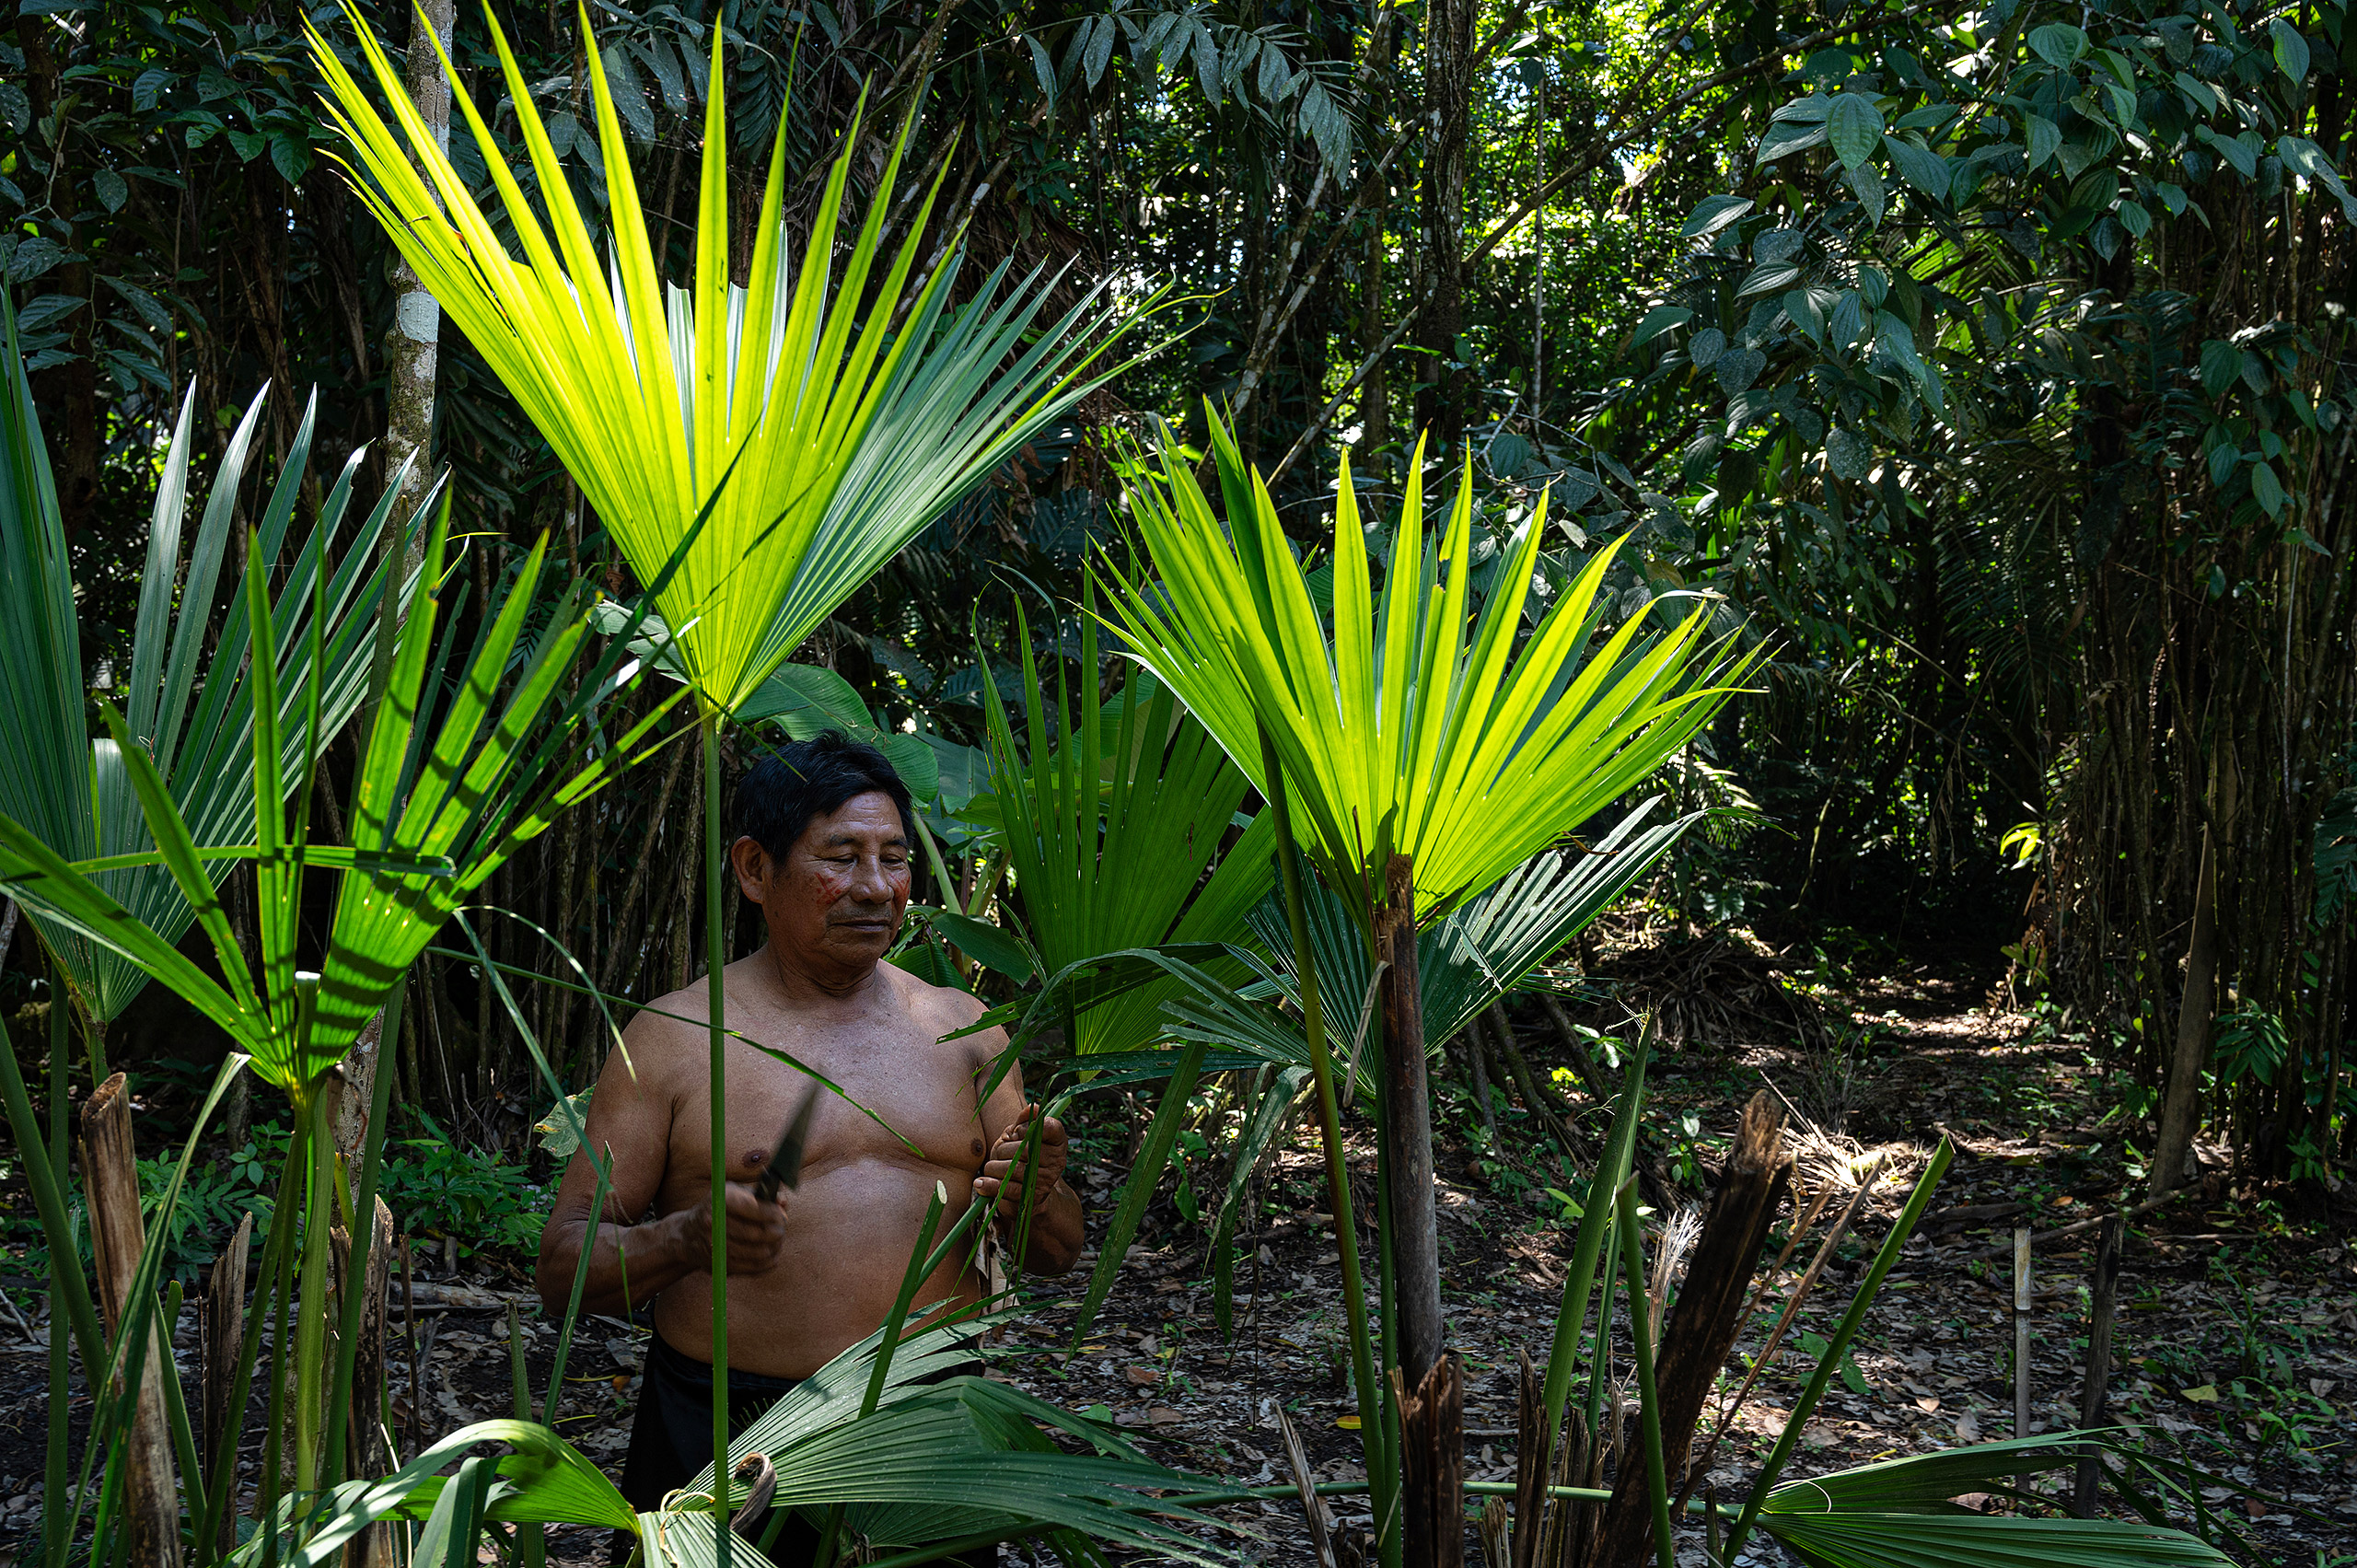 shirtless man standing in forest near tall fan palms